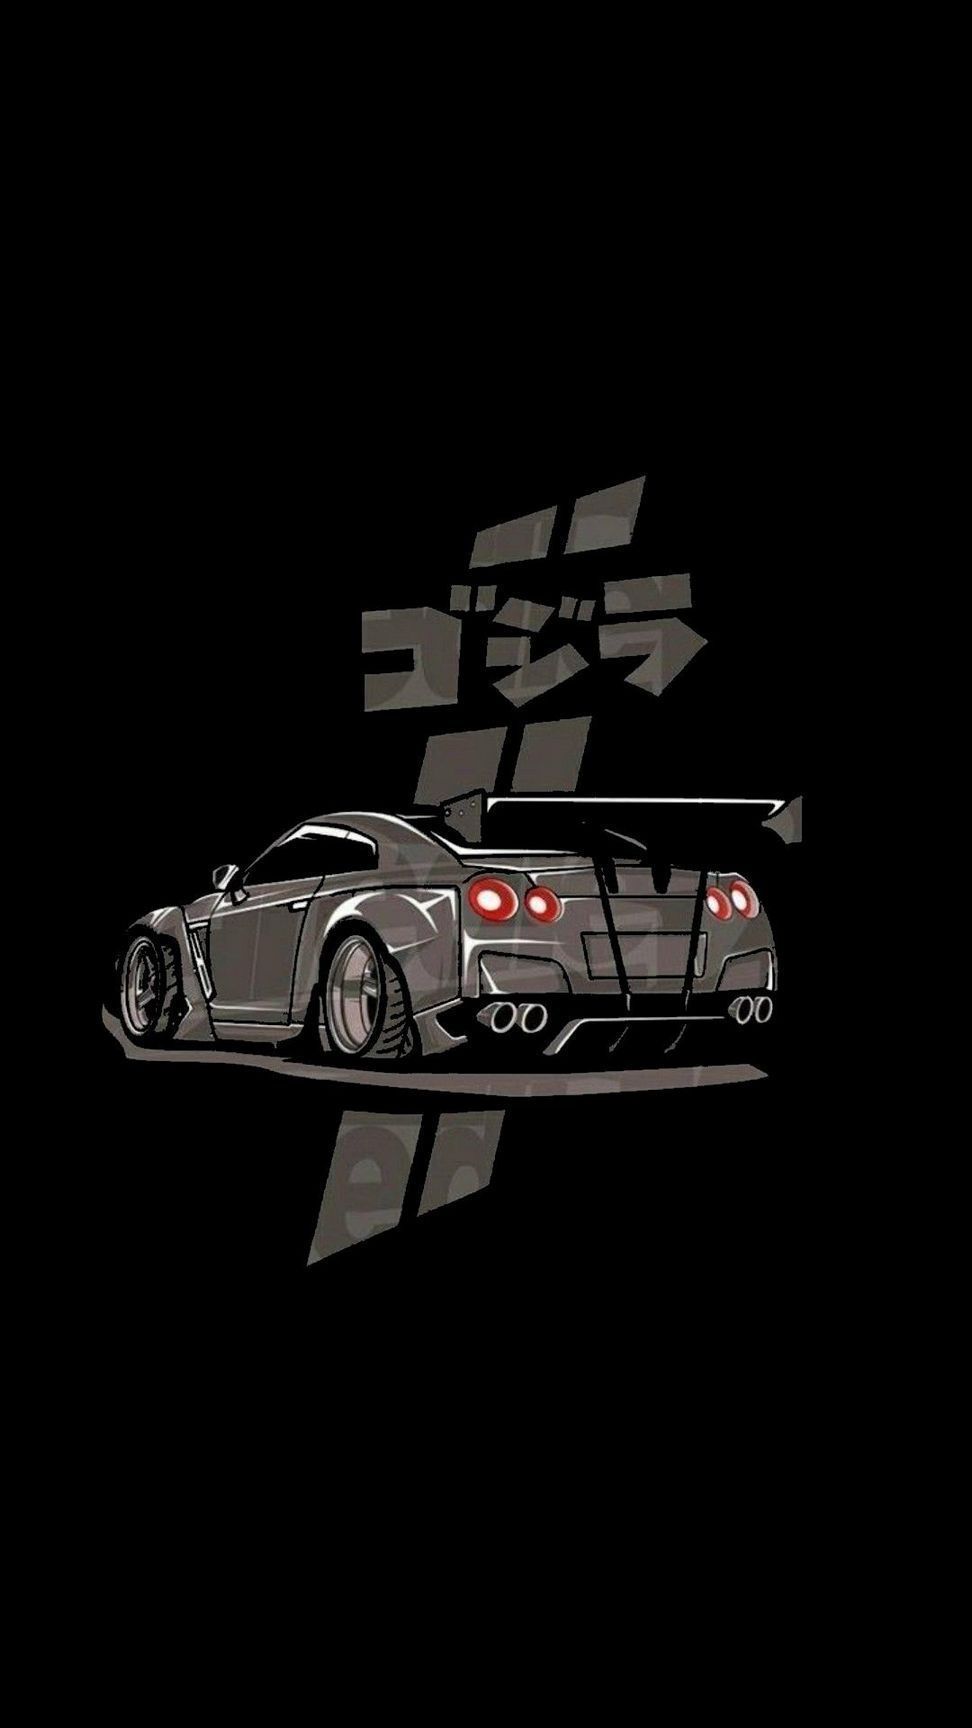 Greatest Sport Car Wallpaper Ideas for Android and iPhone #nissangtr If you cannot recognize where you'. Nissan gtr wallpaper, Sports car wallpaper, Art cars